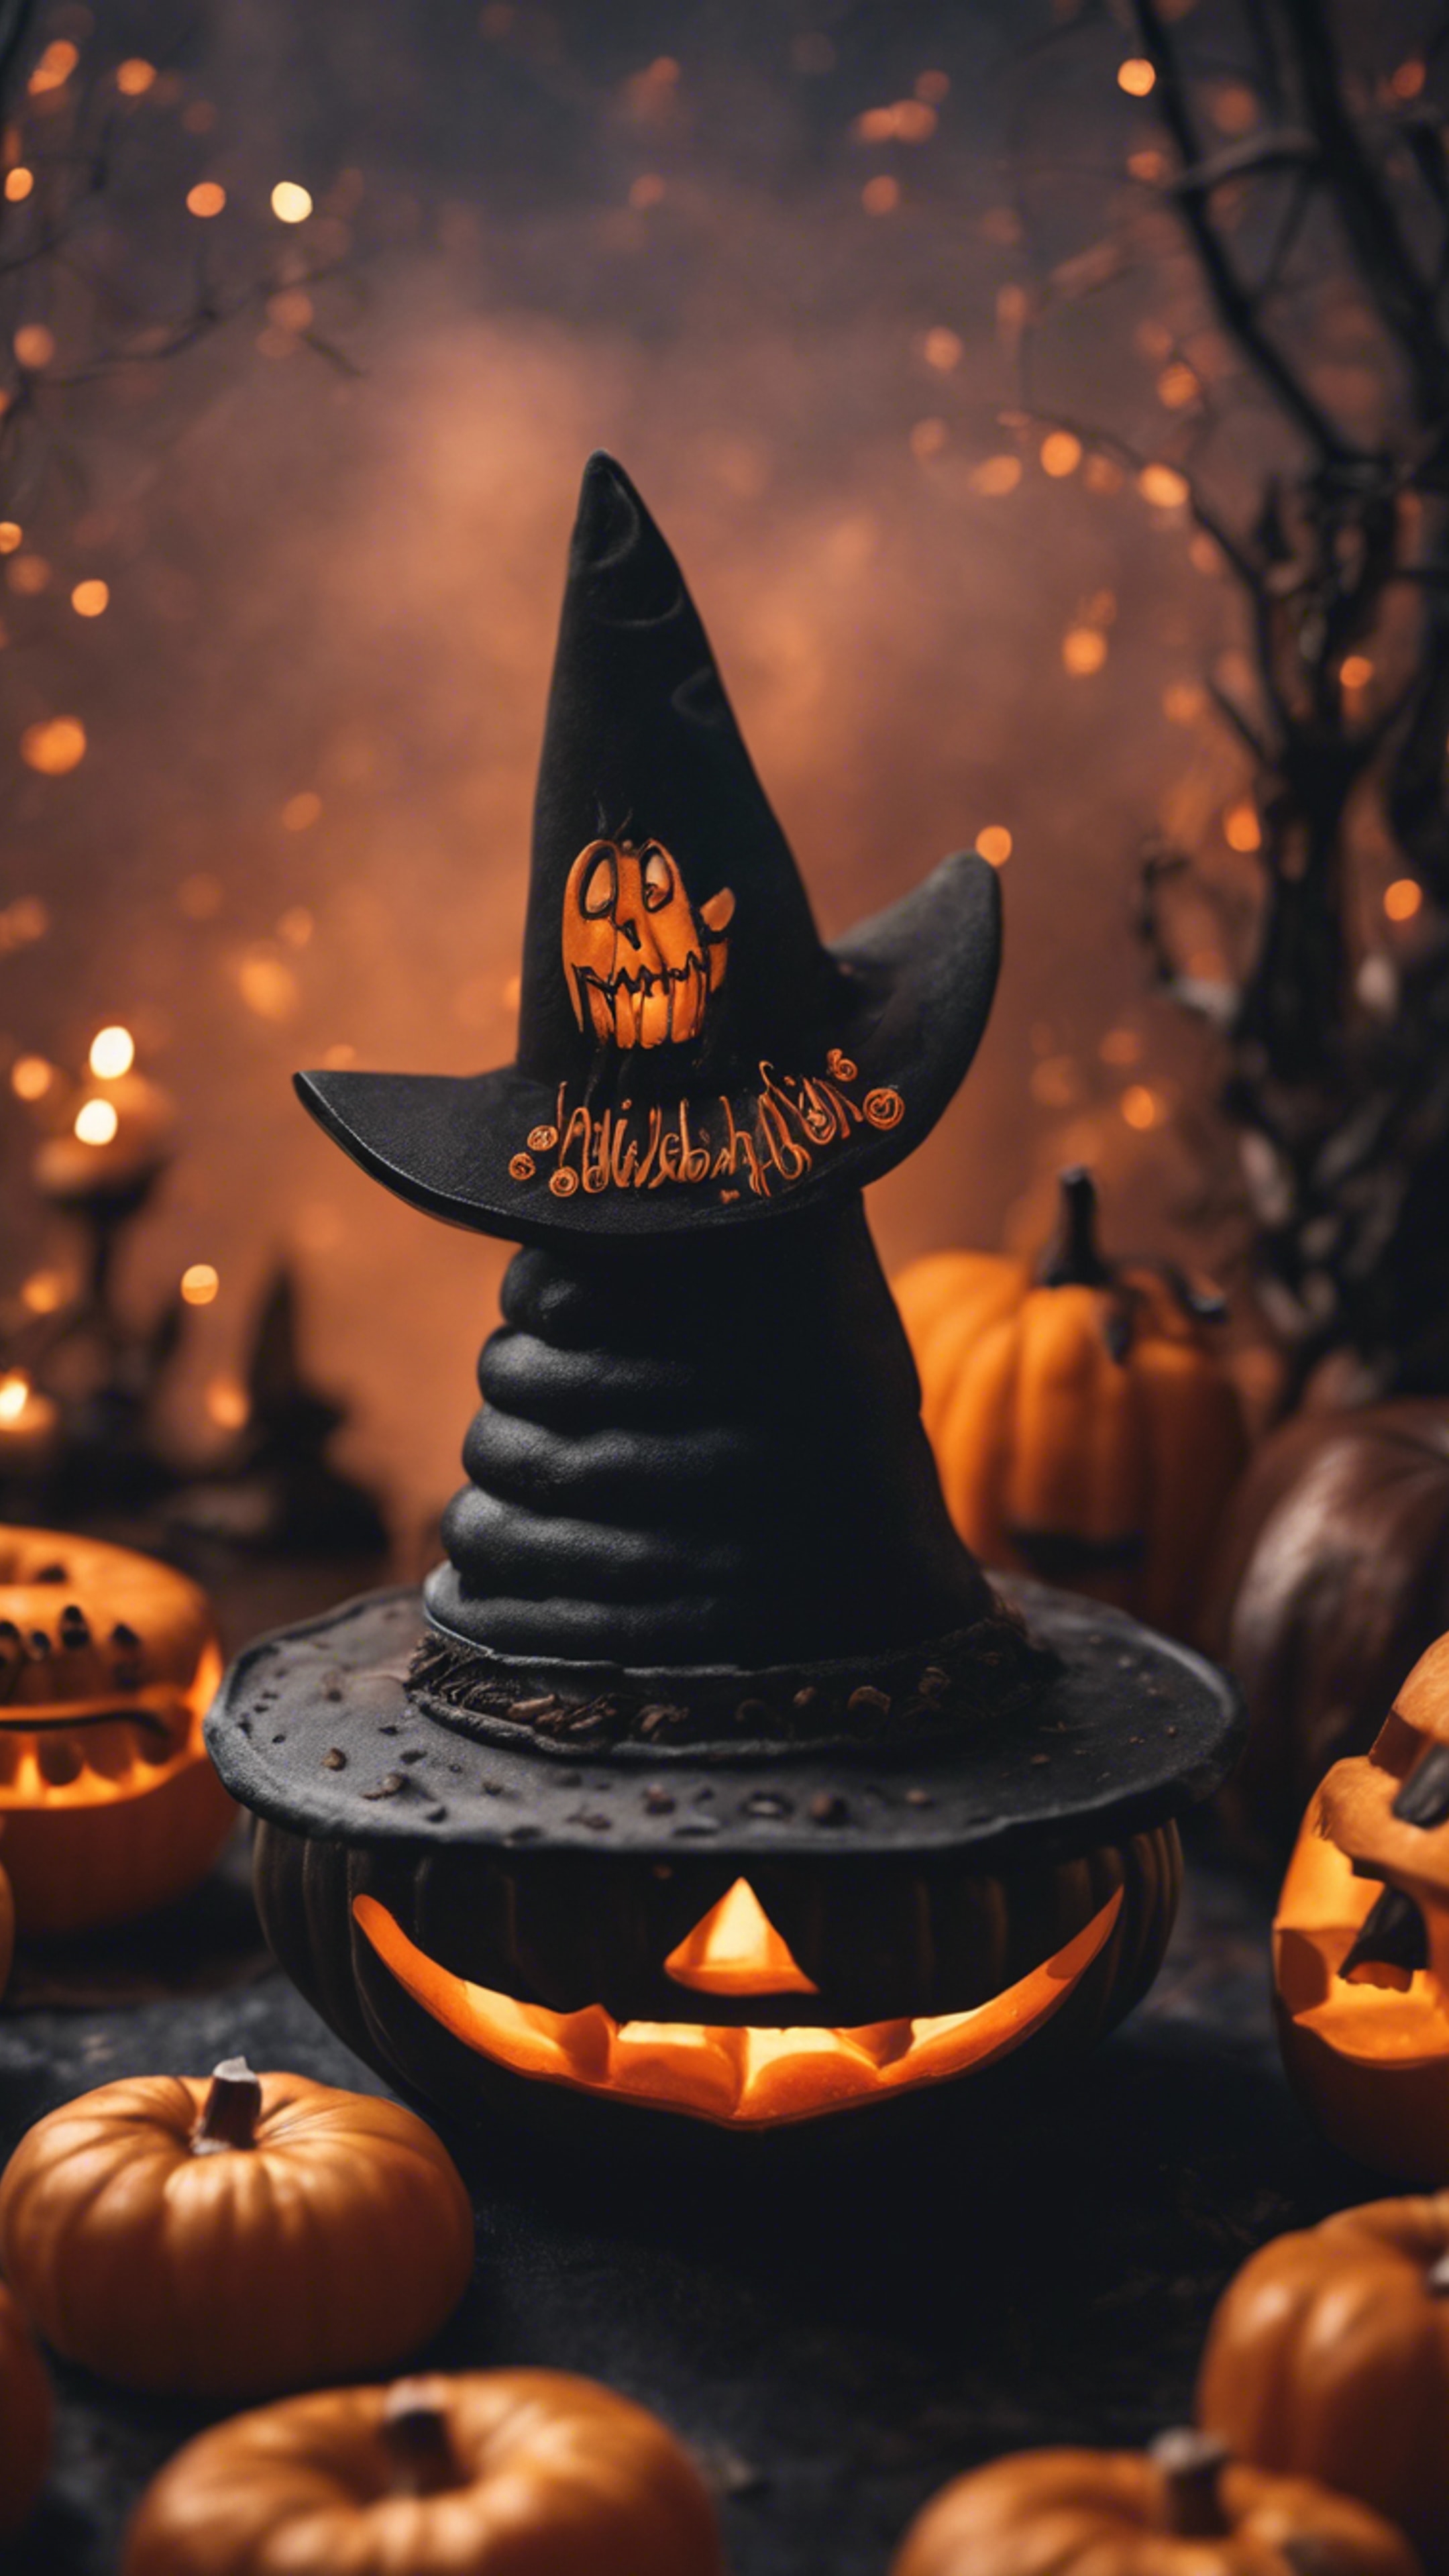 A spooky scene with jack-o-lanterns and a black witch's hat on a pumpkin-spiced donut. کاغذ دیواری[393956df6a264774b0c0]